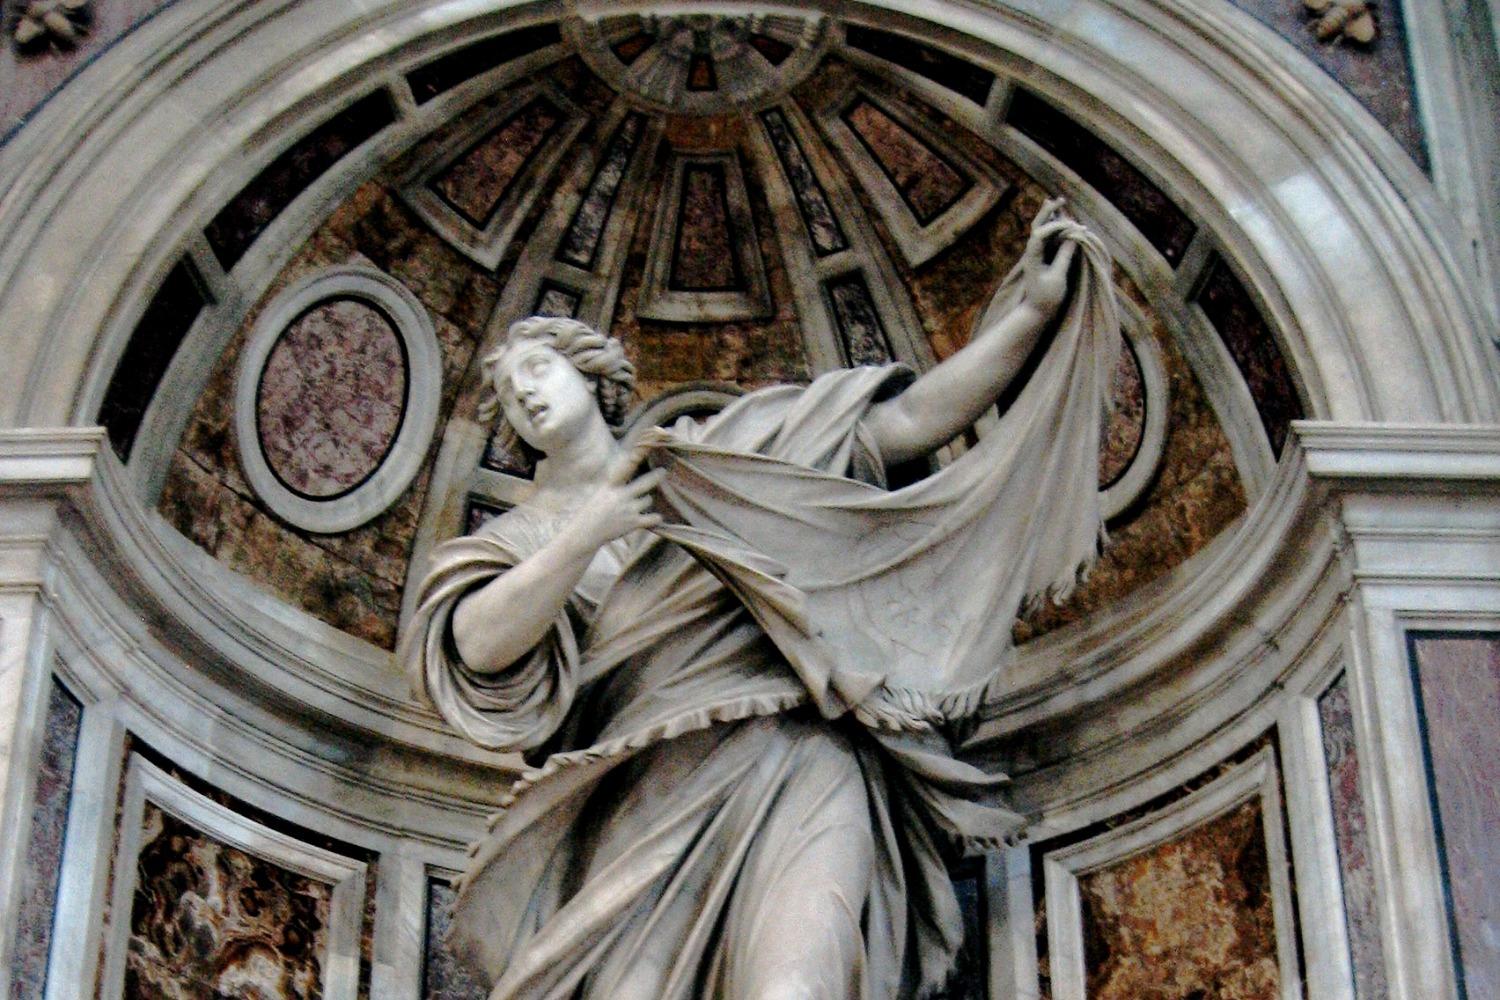 Statue of St. Veronica and the Veil in St. Peter's Basilica